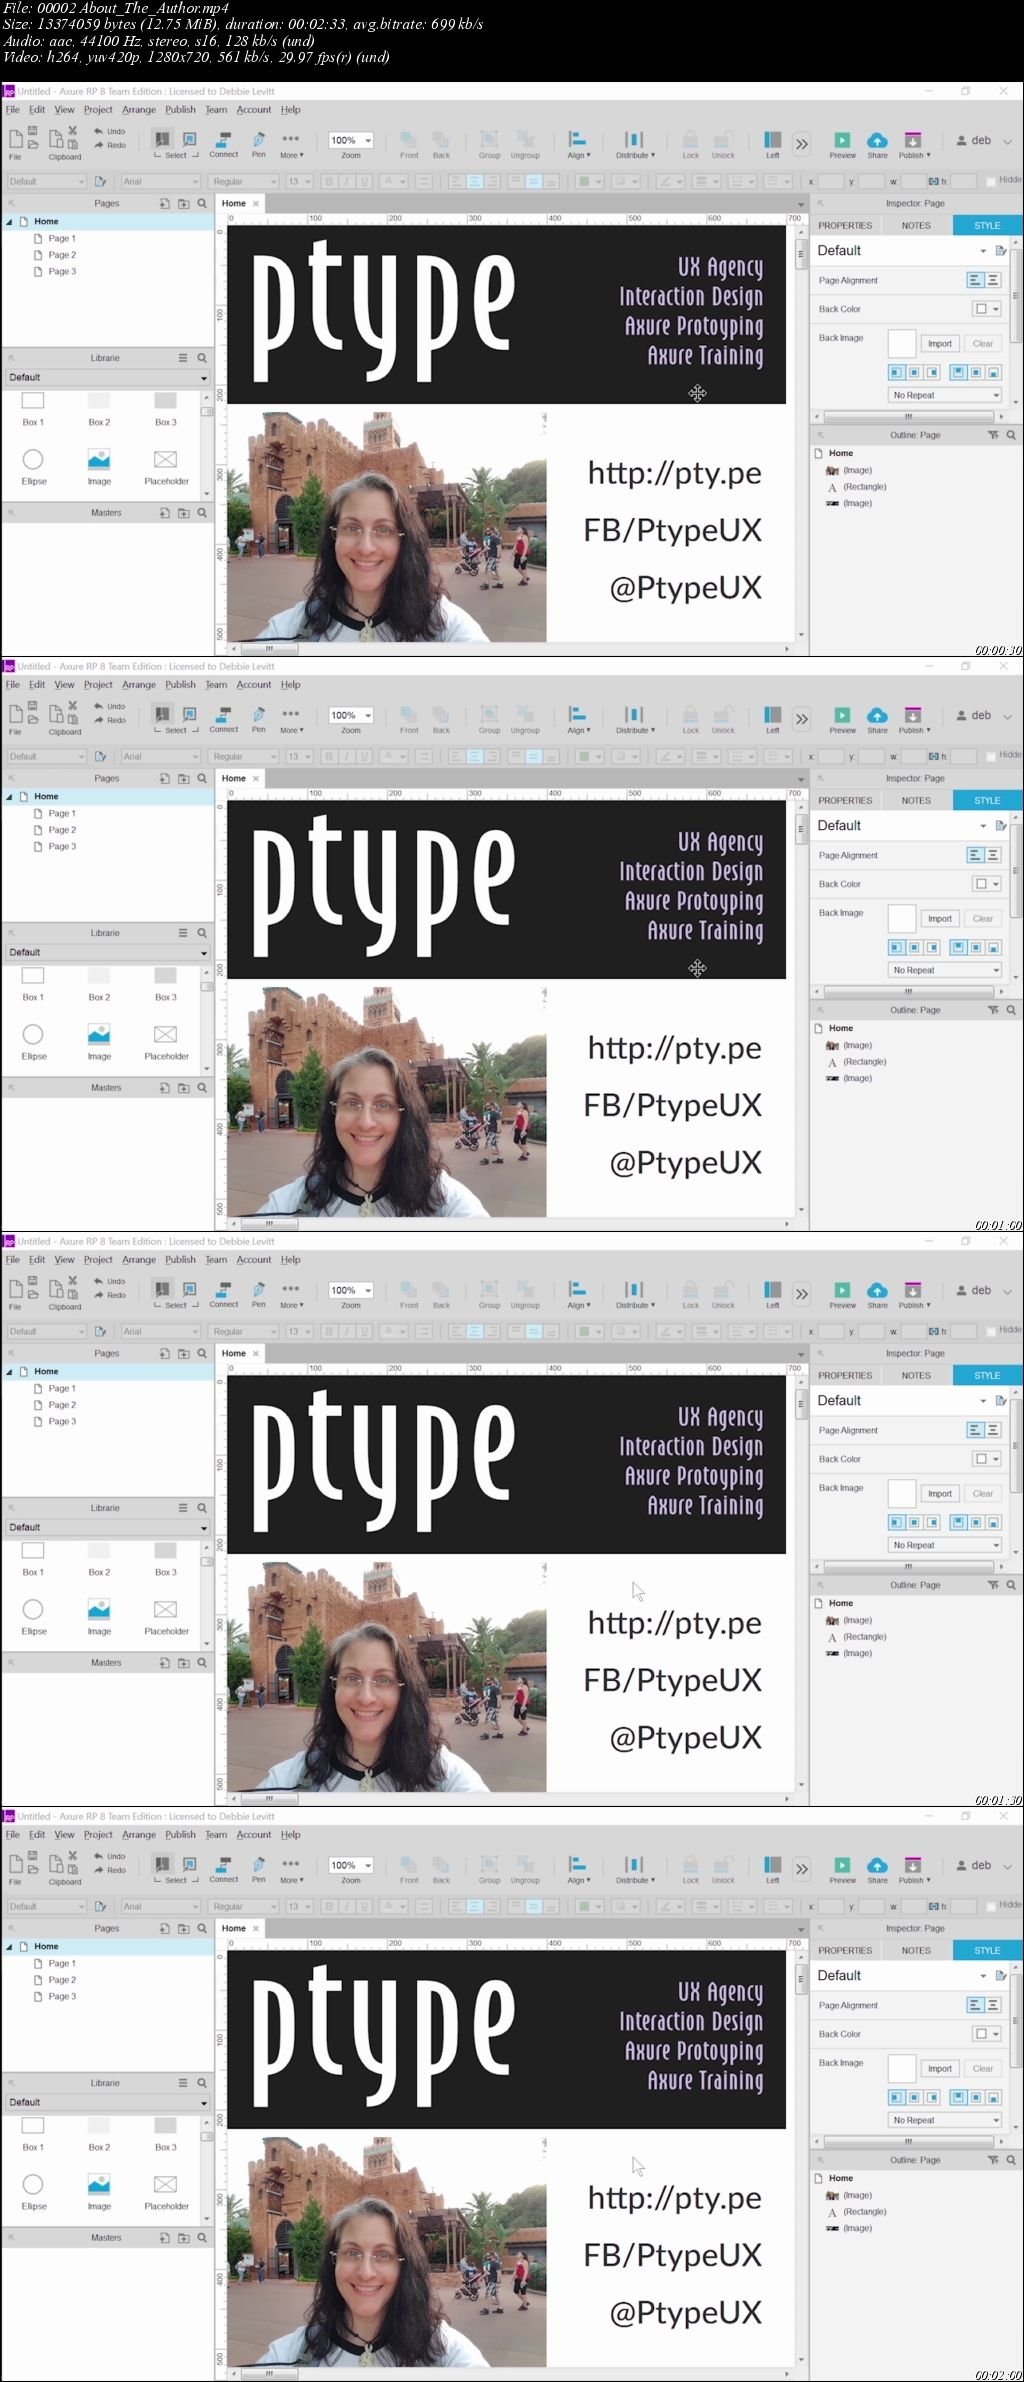 interactive prototyping with axure rp 8